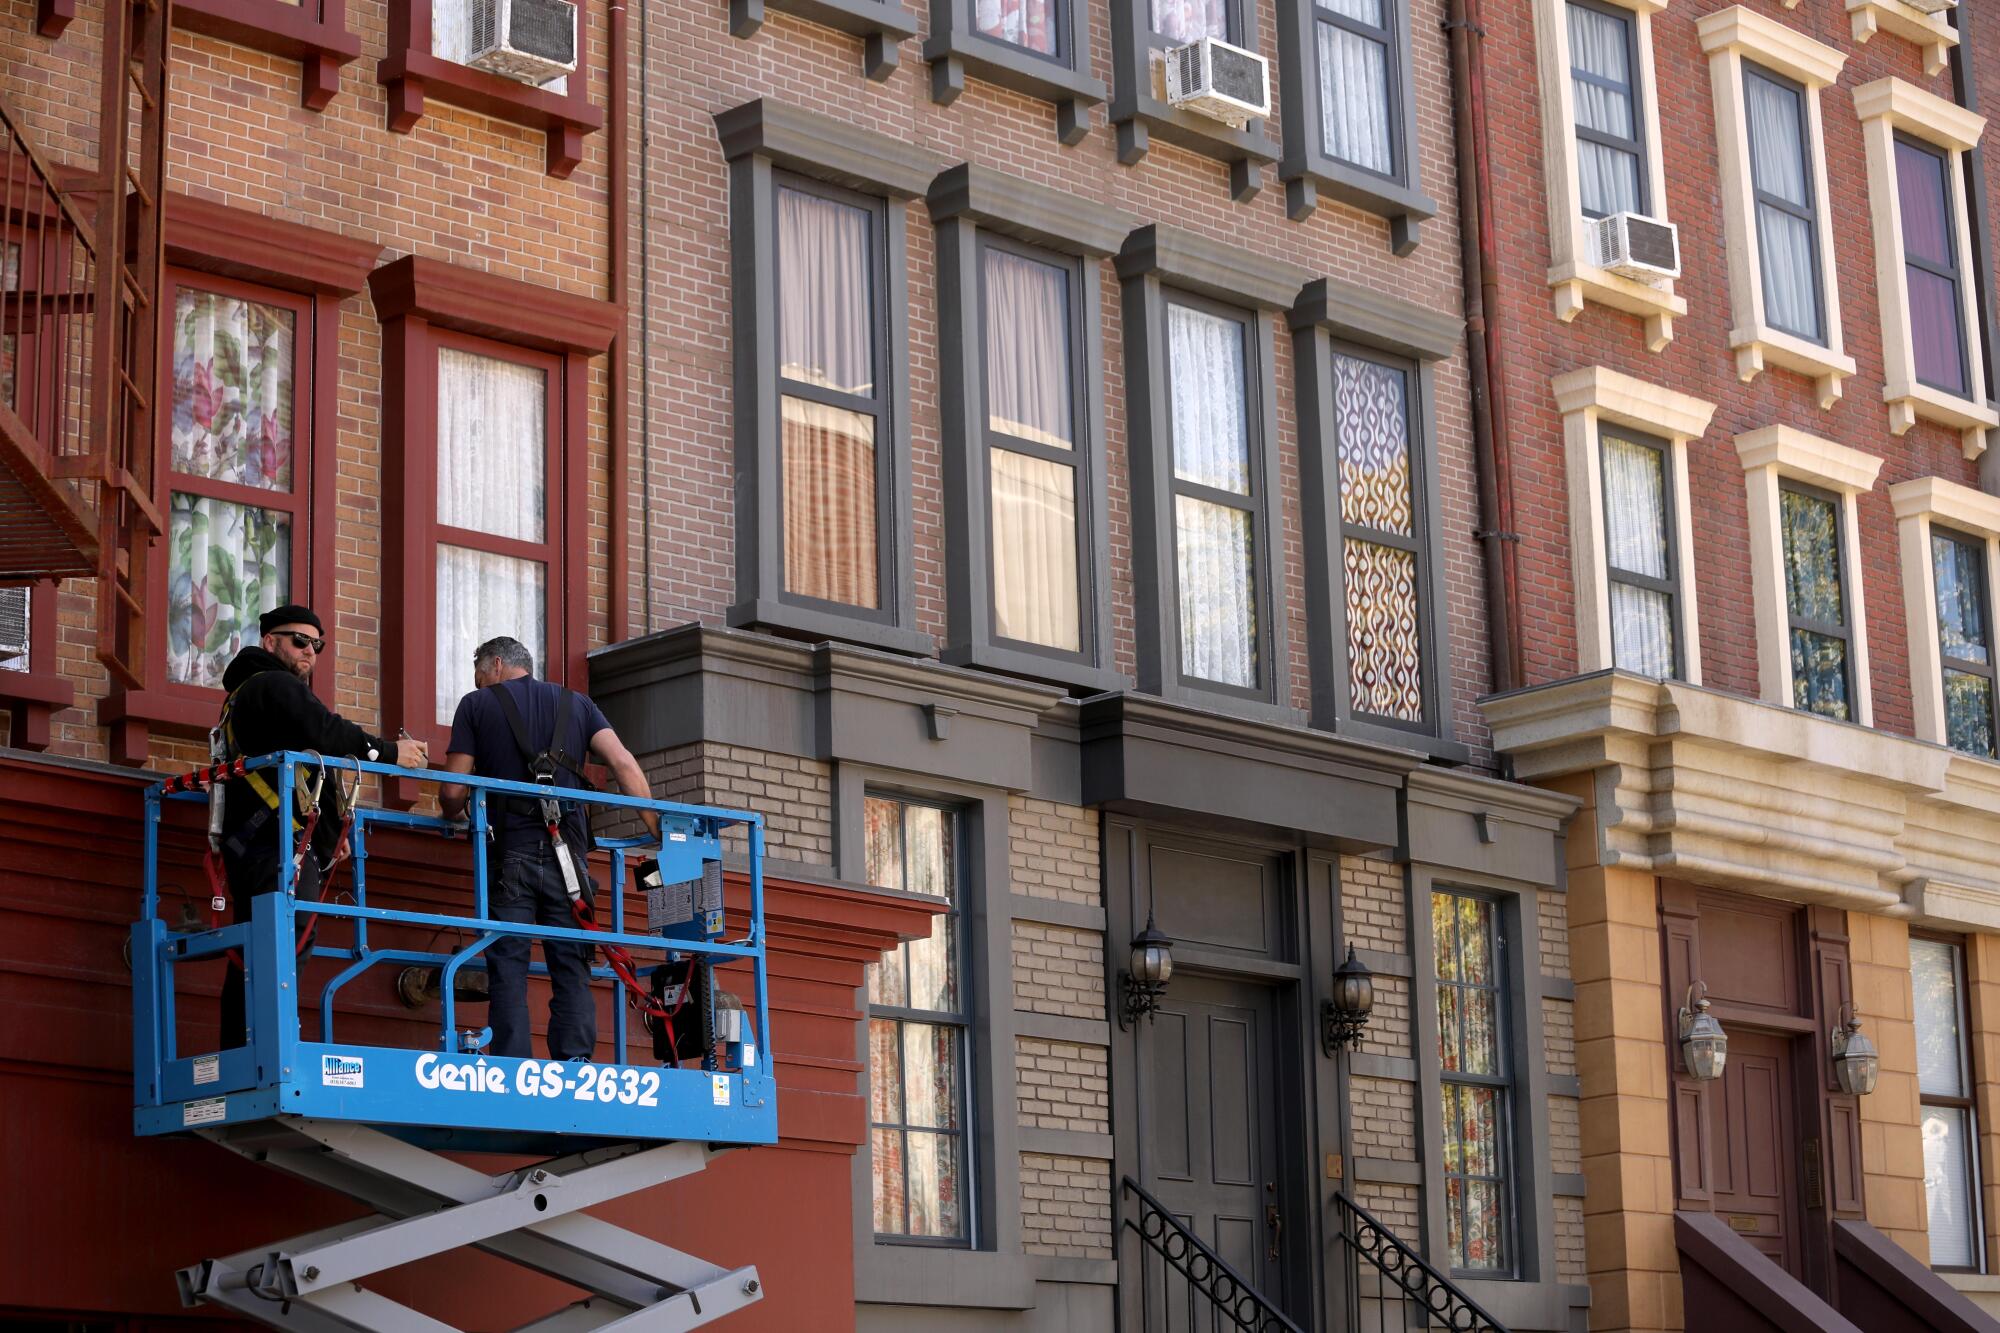 Two men on a scissor lift work on the fa?ade of a brownstone building on Fox's New York set.